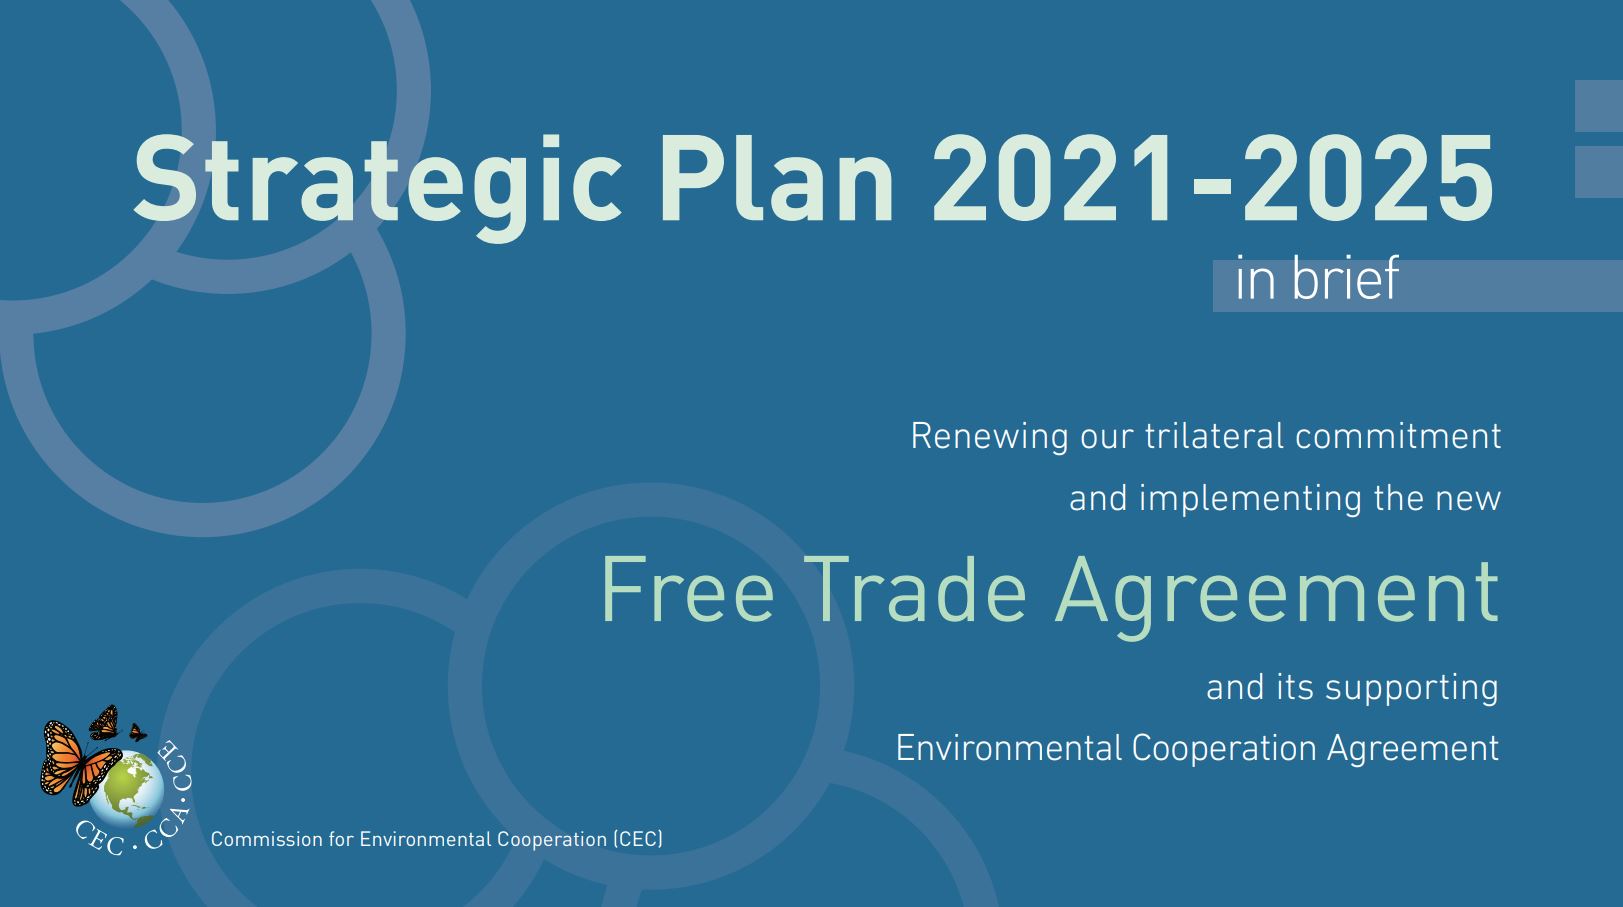 Banner for the CEC's Strategic Plan for 2021-2025